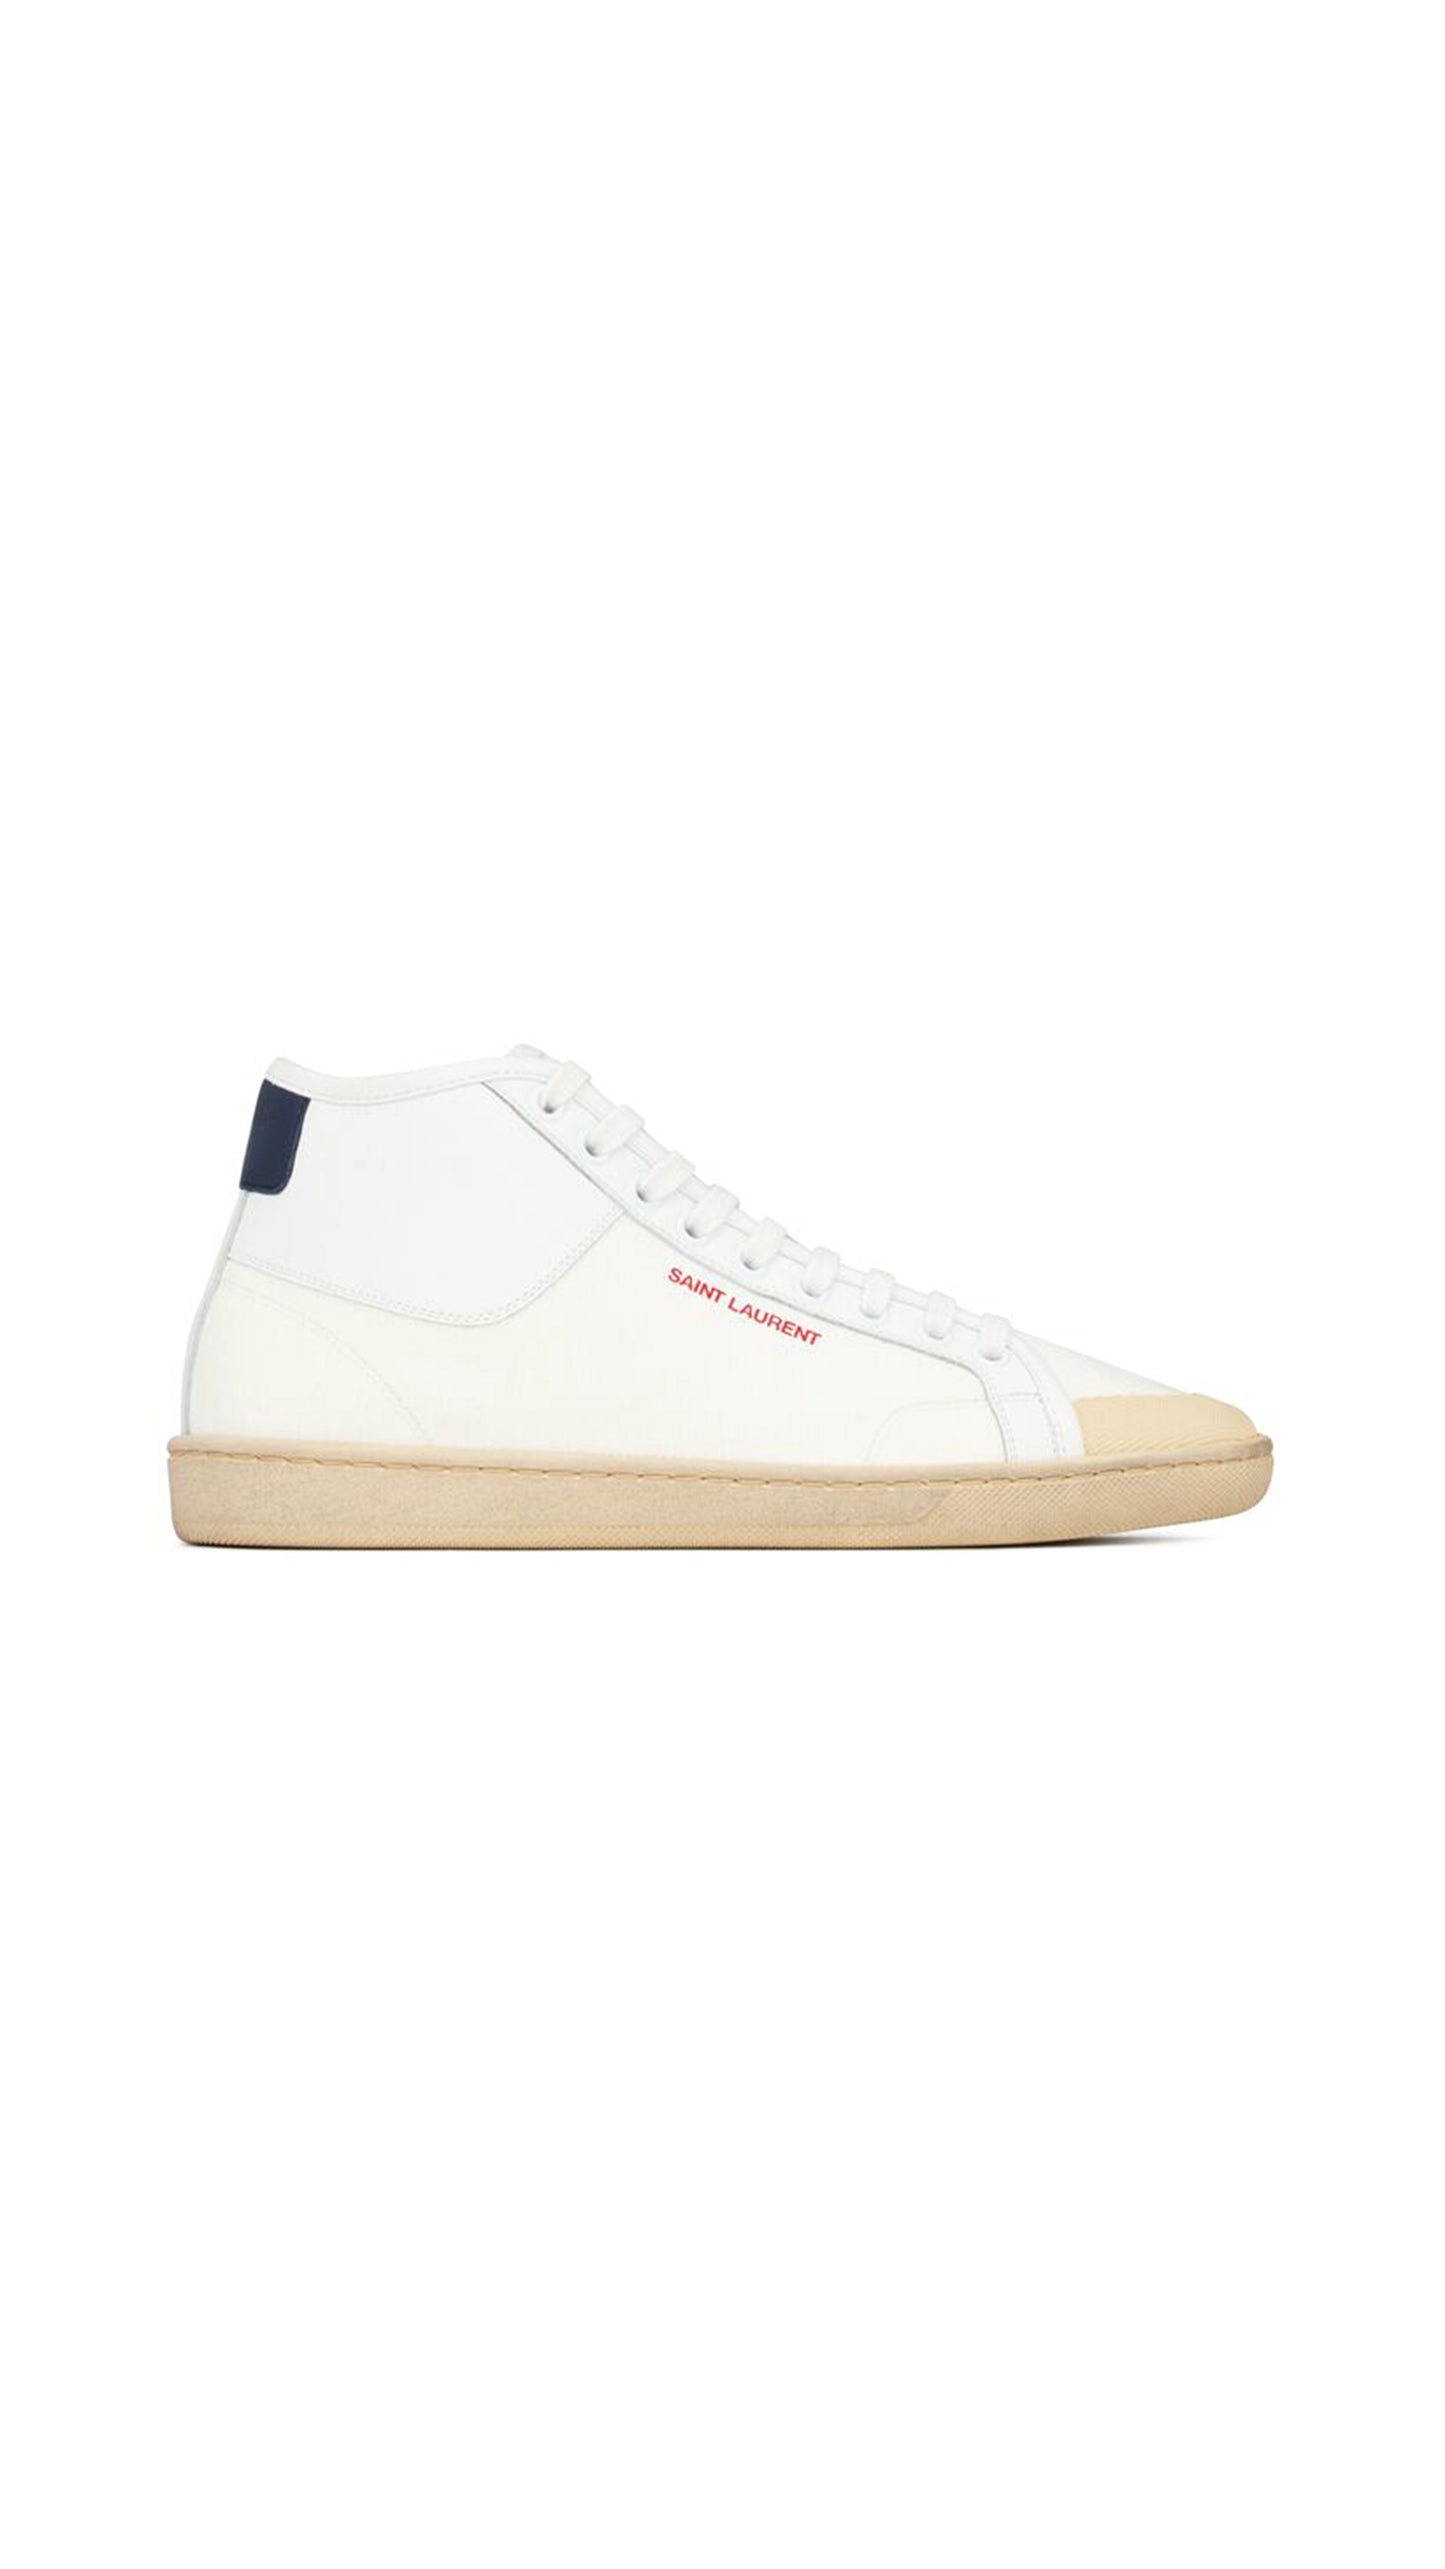 Court Classic SL/39 Mid-Top Sneakers In Canvas And Leather - White